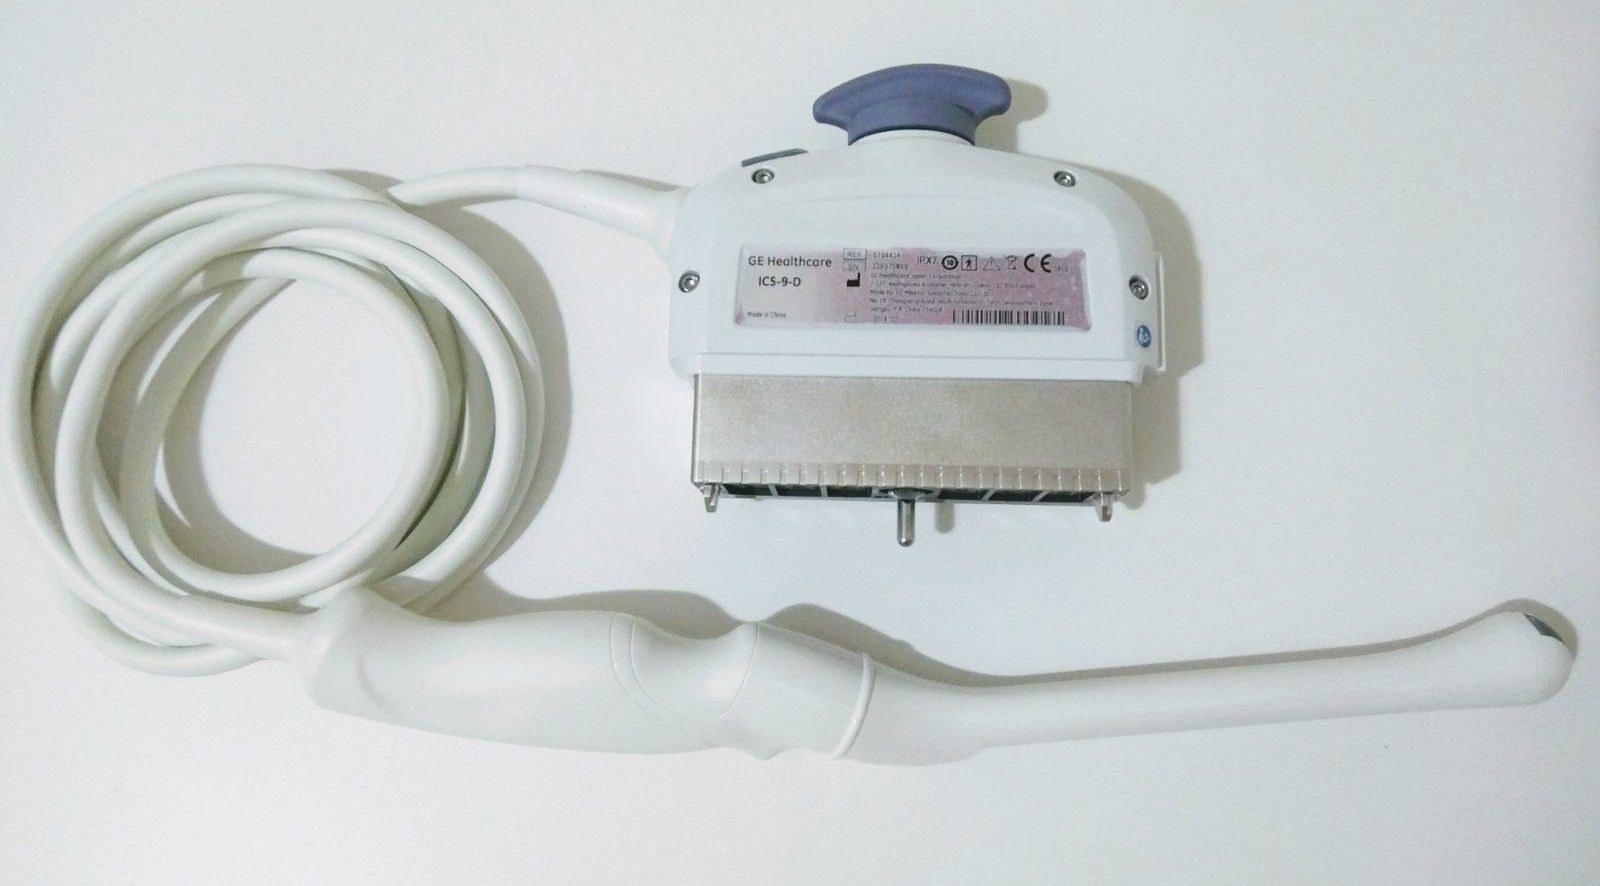 GE IC5-9-D MICRO-CONVEX BRAND NEW 2014 TRANSVAGINA ENDOCAVITY TRANSDUCER PROBE DIAGNOSTIC ULTRASOUND MACHINES FOR SALE